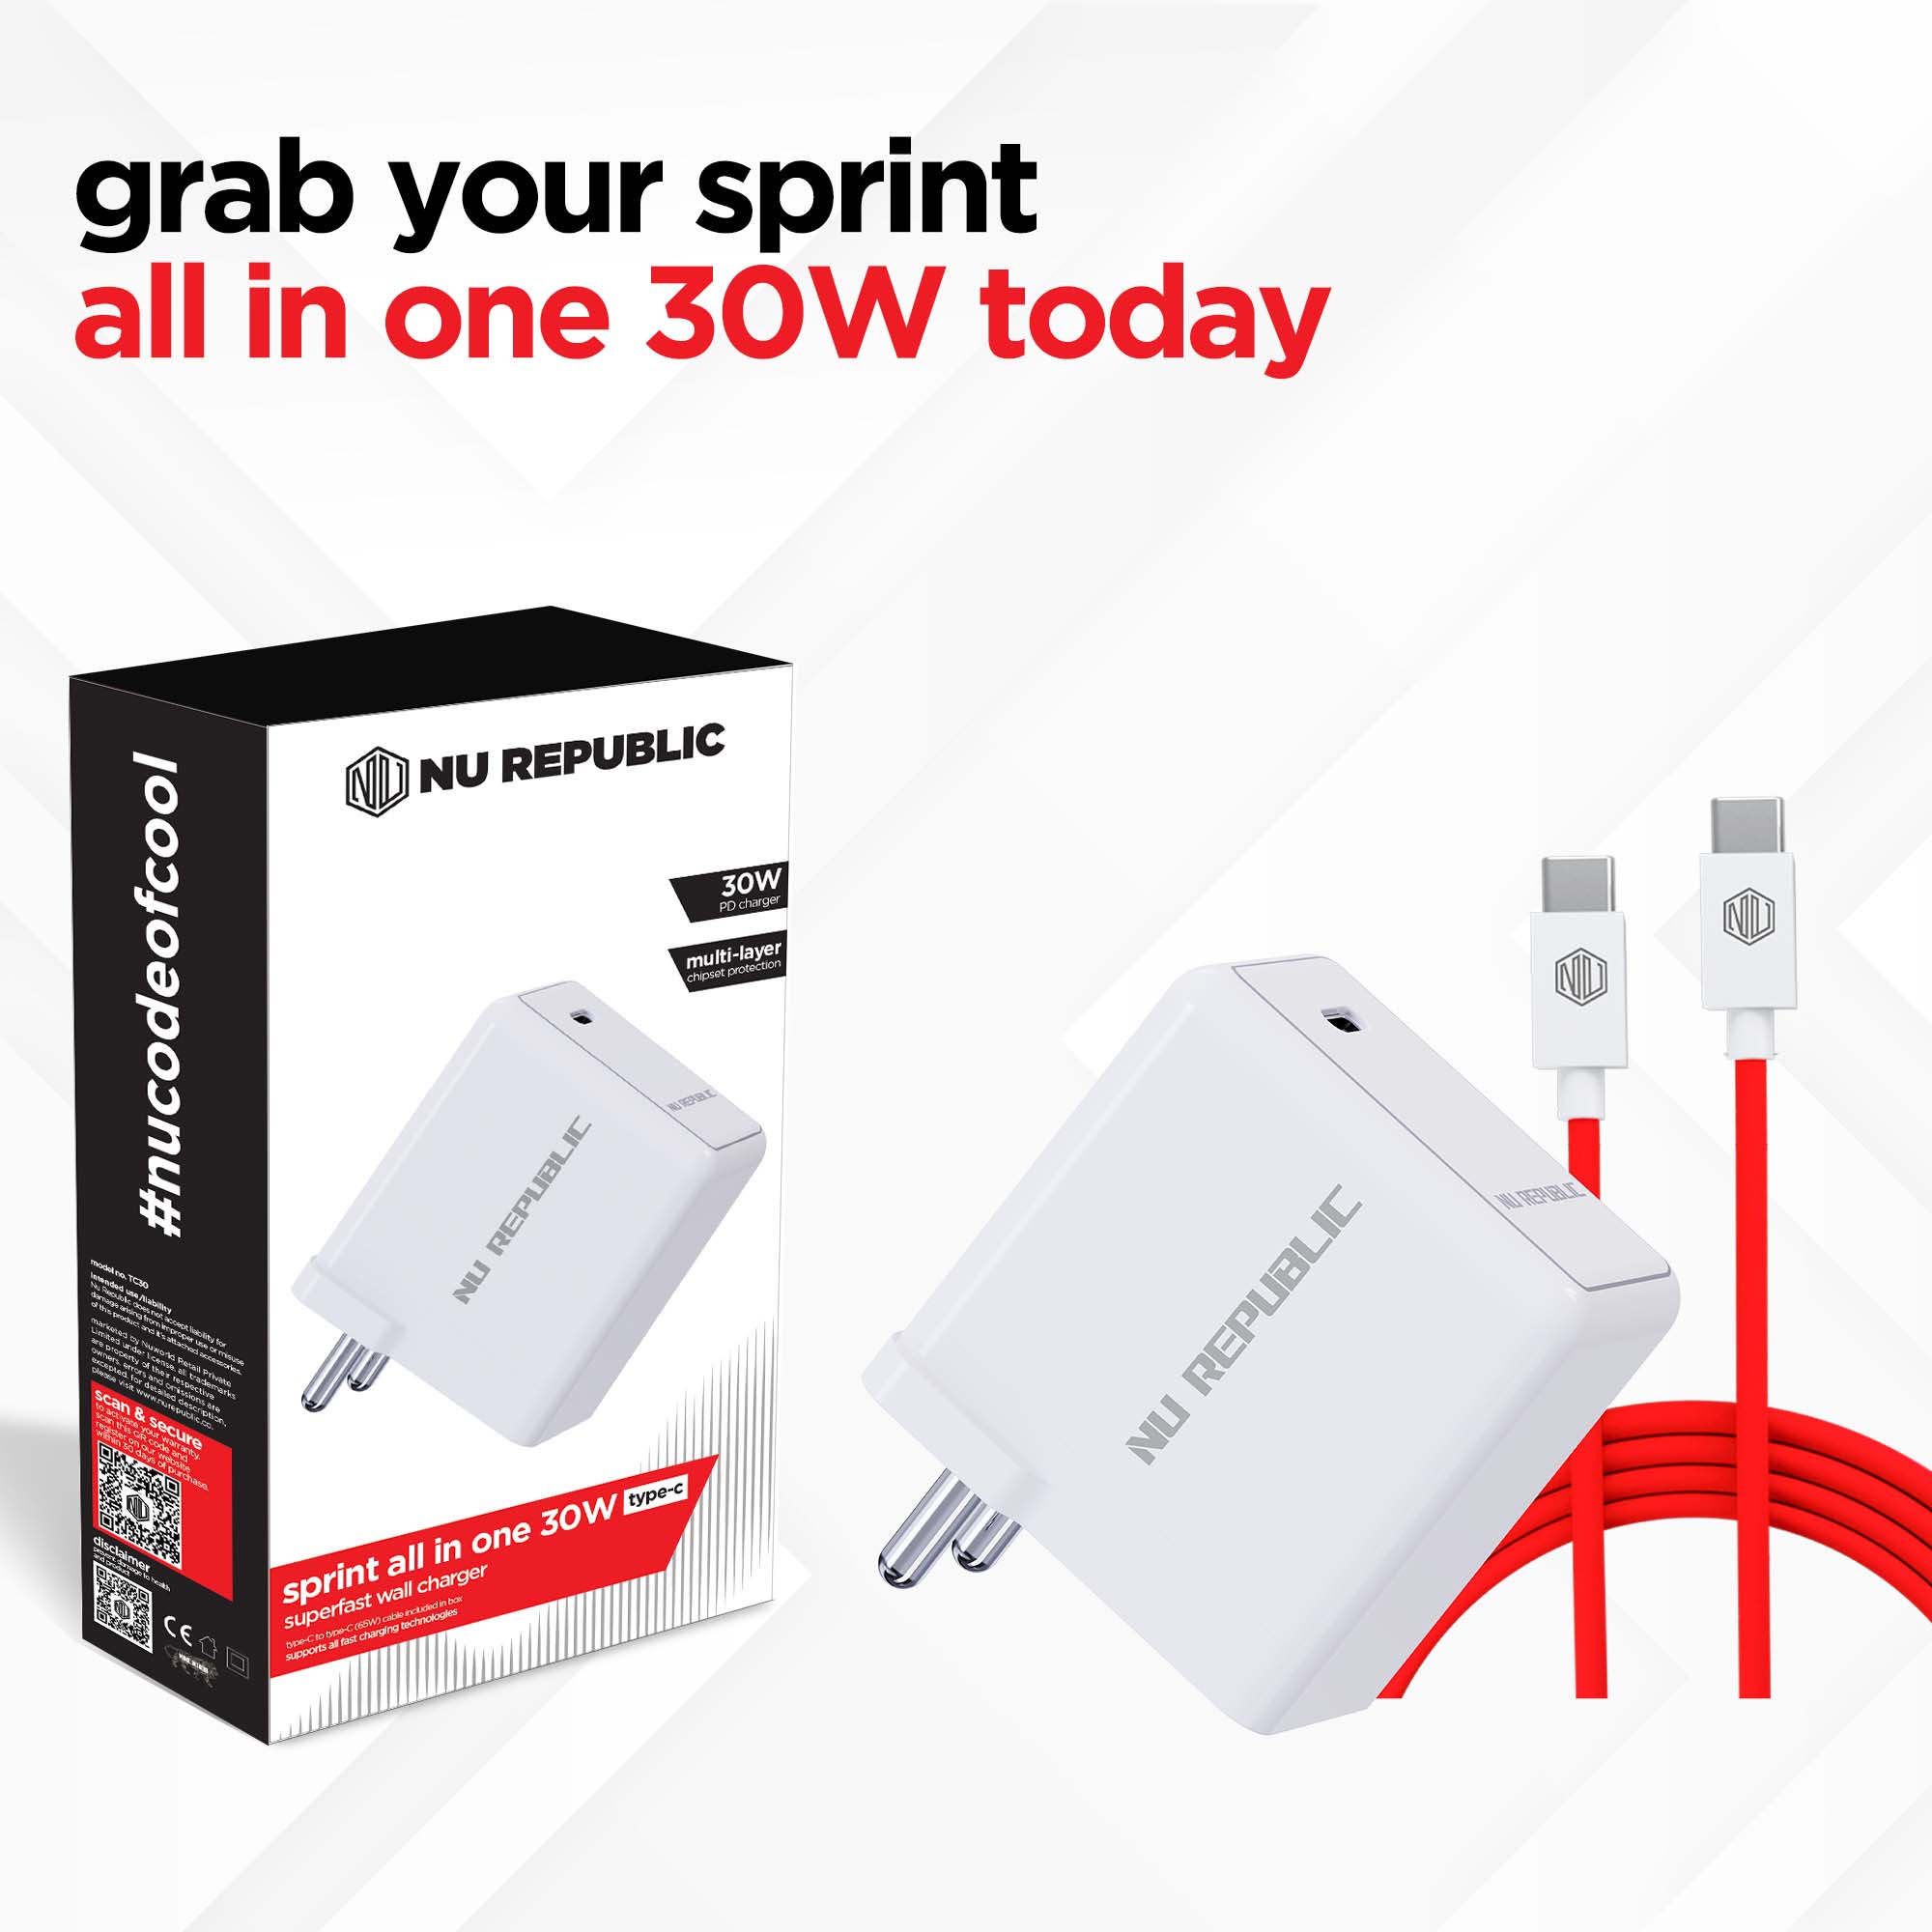 Sprint All In One 30W 6A Fast Charging Adapter with Cable (Type-C to Type-C)